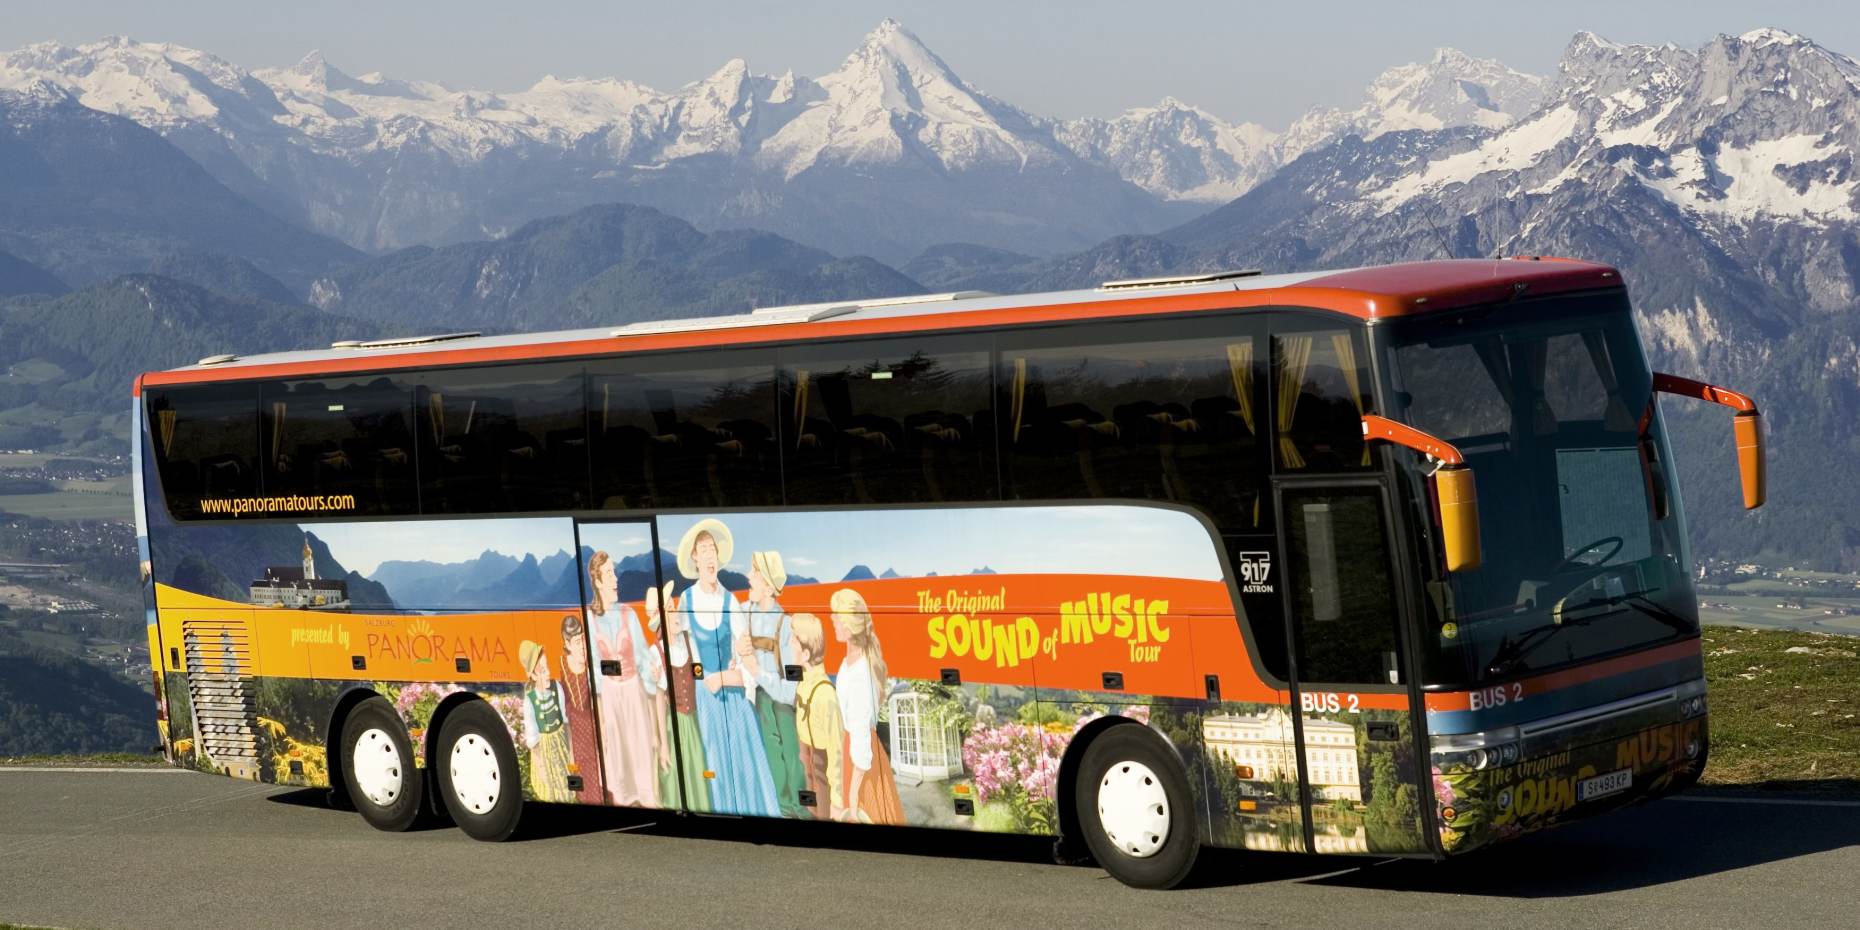 sound of music tour in winter